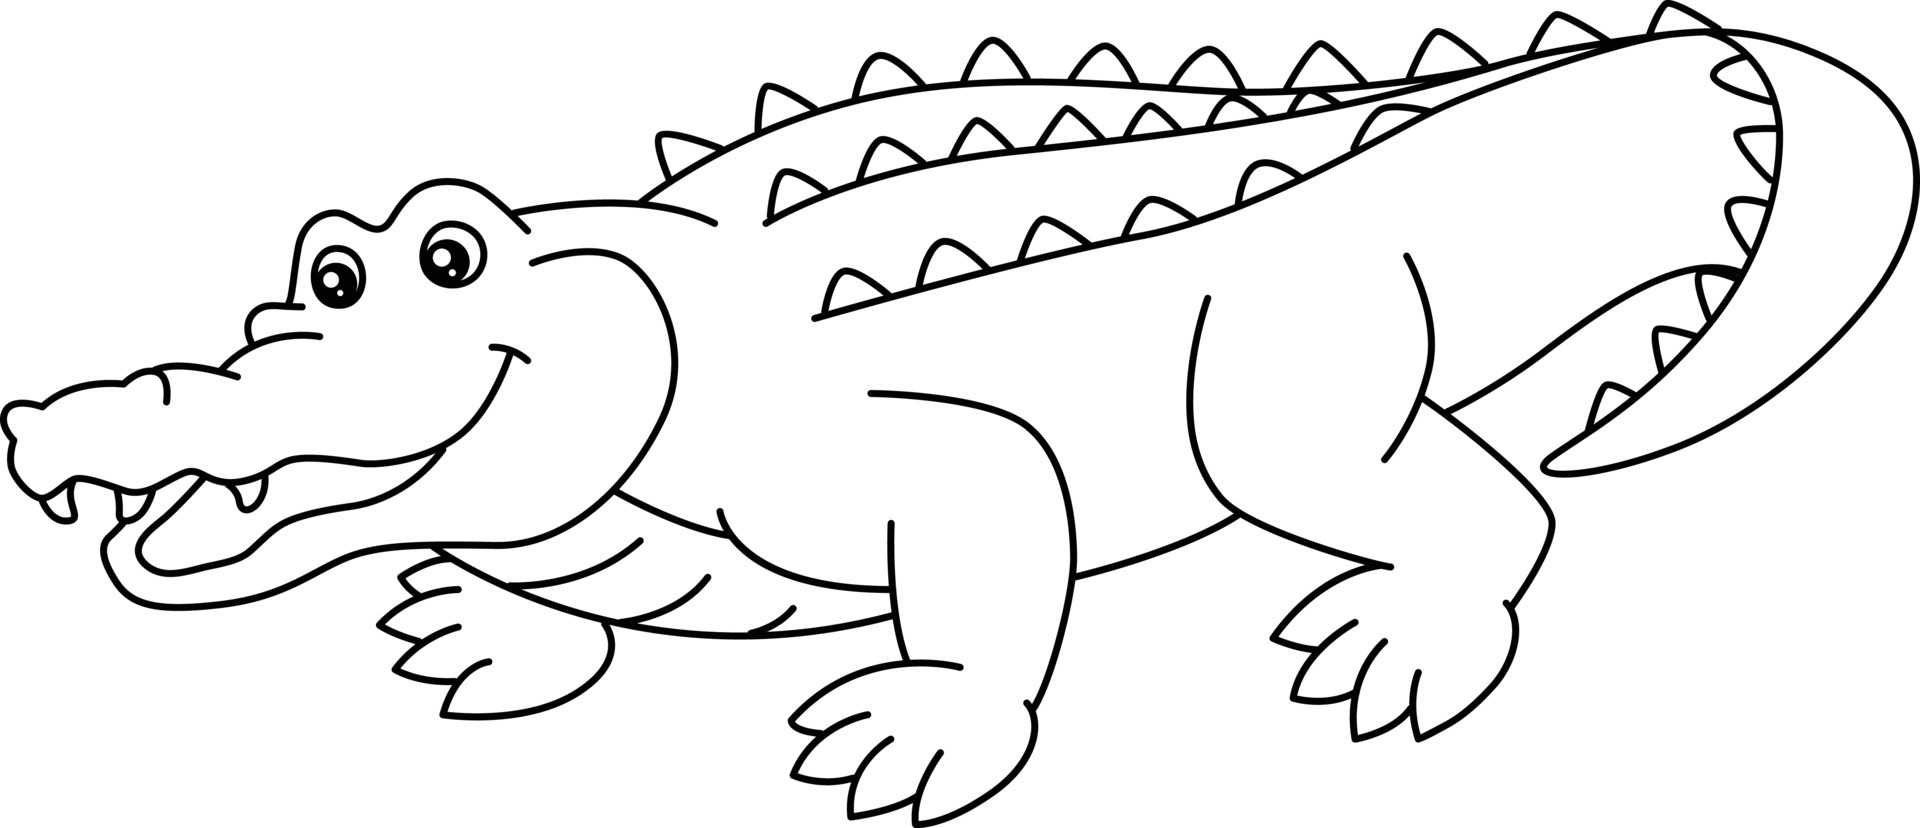 Crocodile Coloring Page Isolated for Kids 21 Vector Art at ...